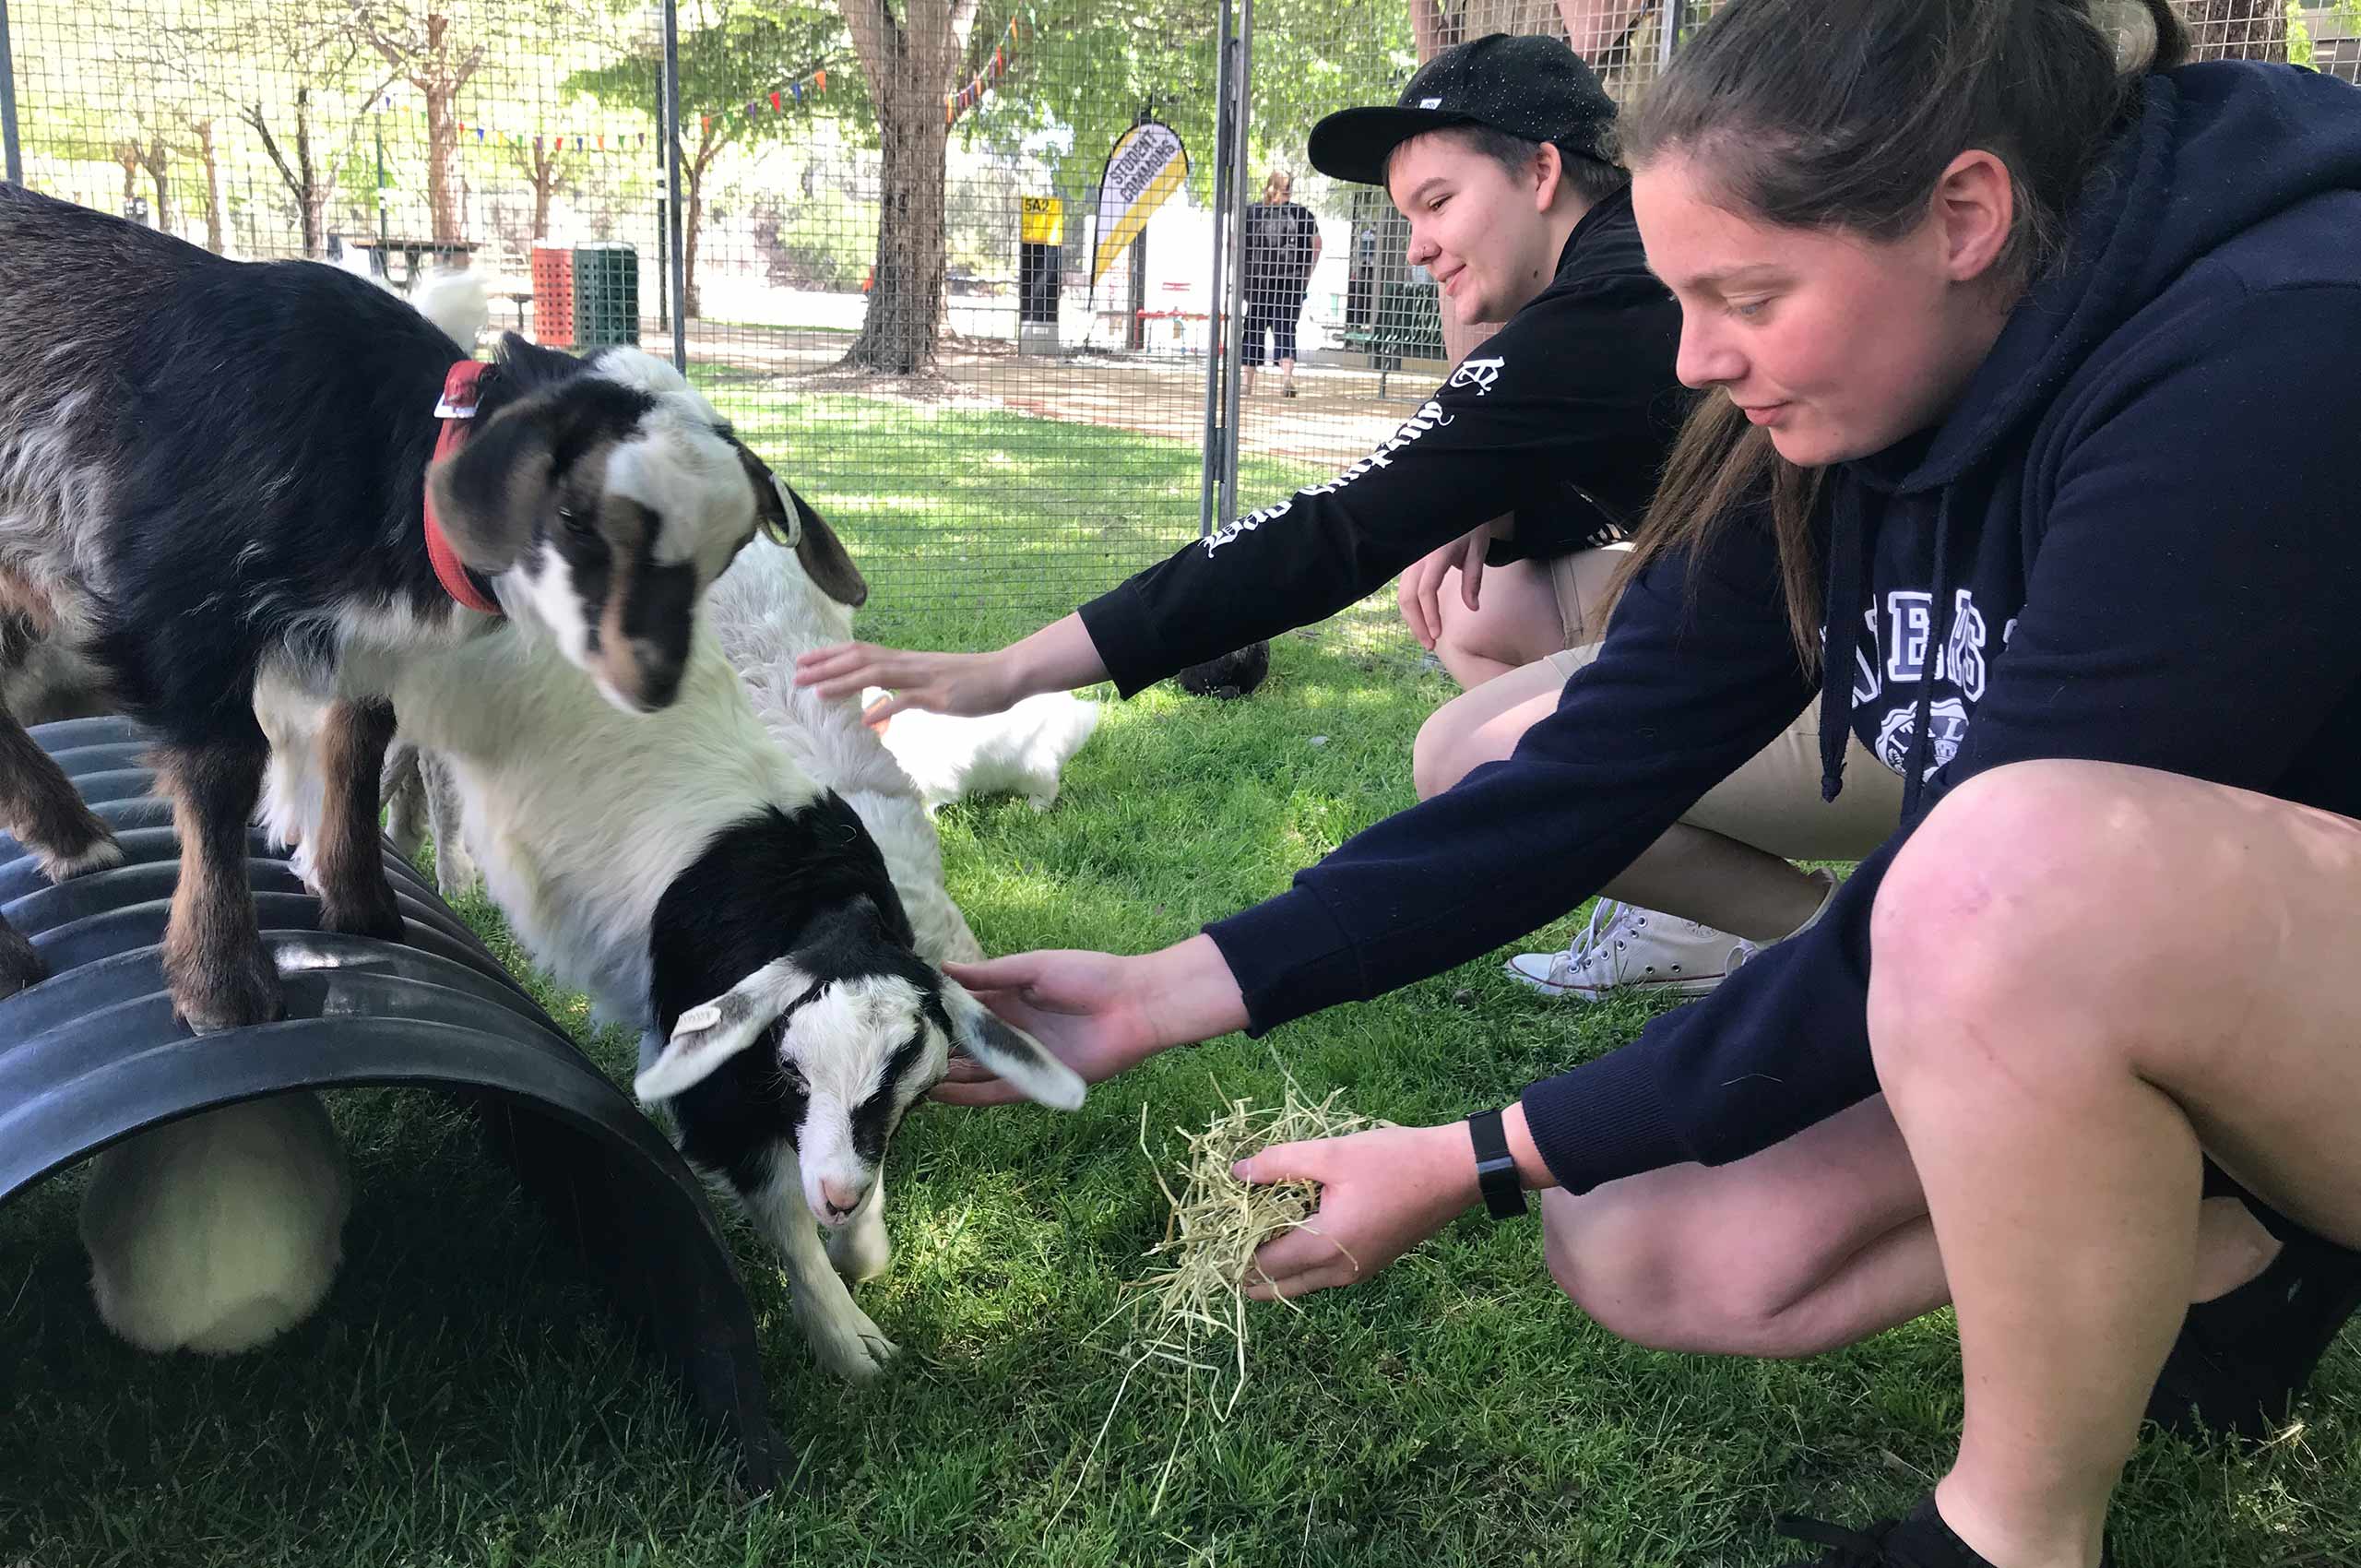 Two children petting animals at a campus event.